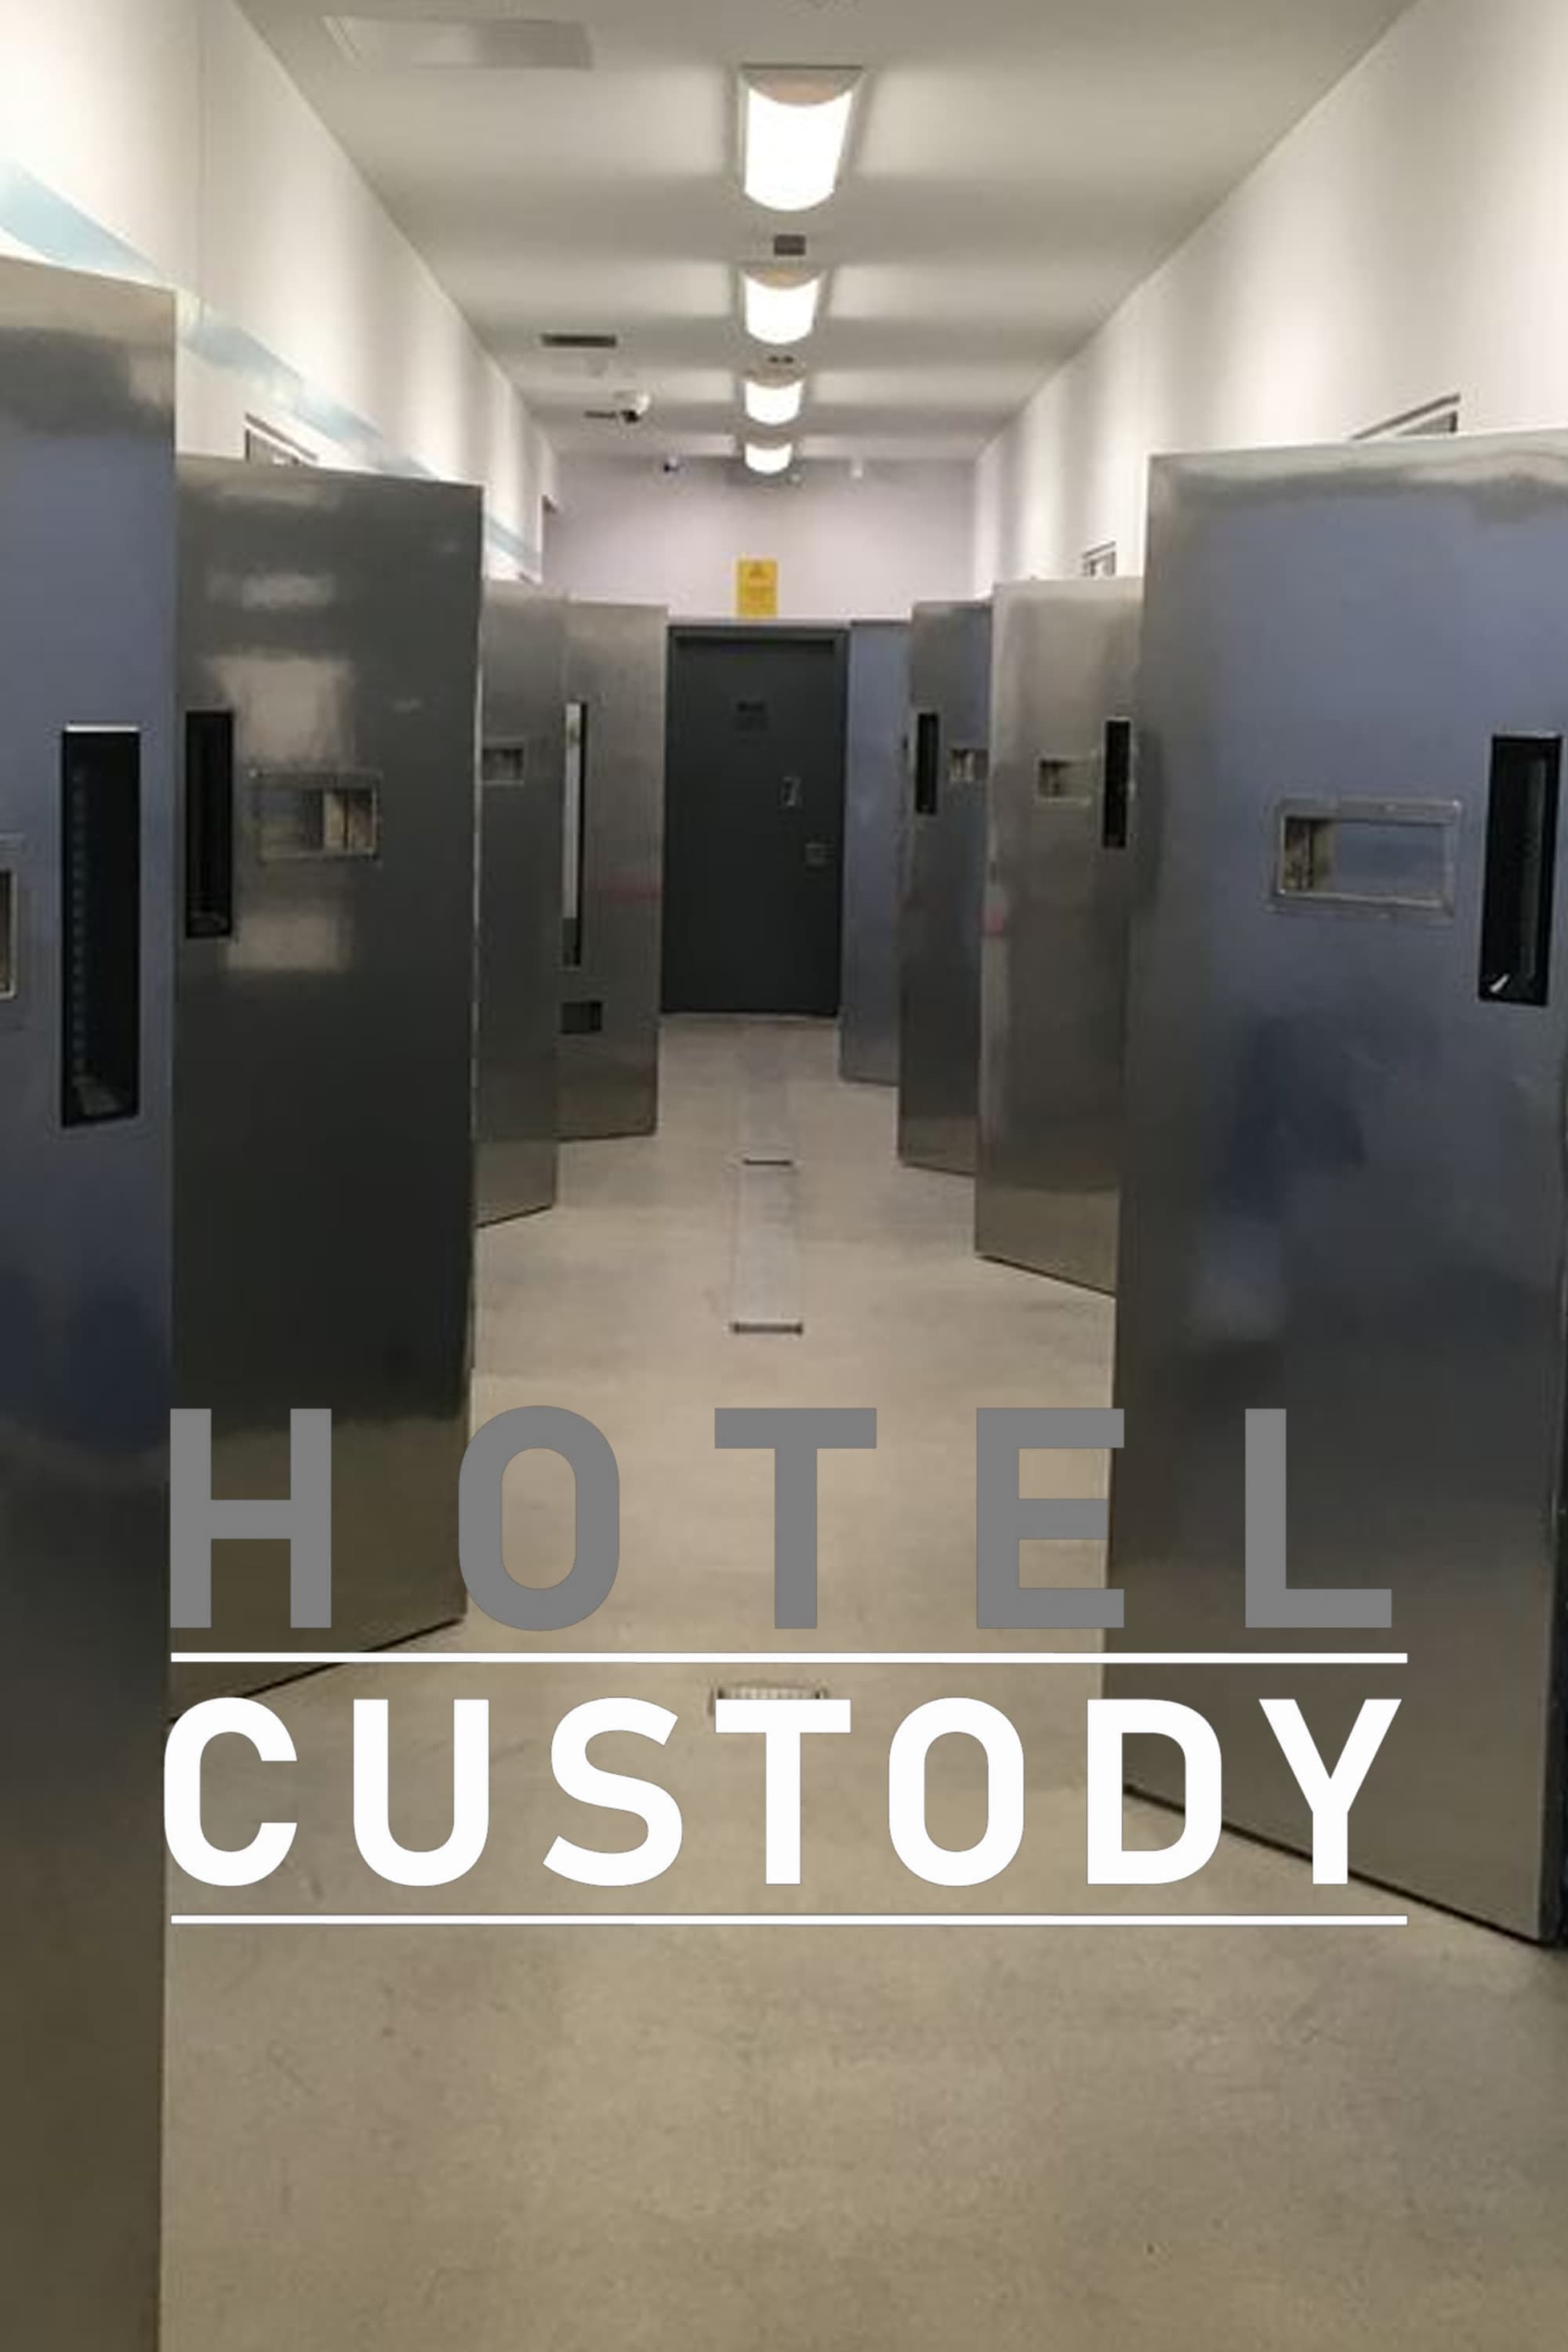 Hotel Custody TV Shows About Justice